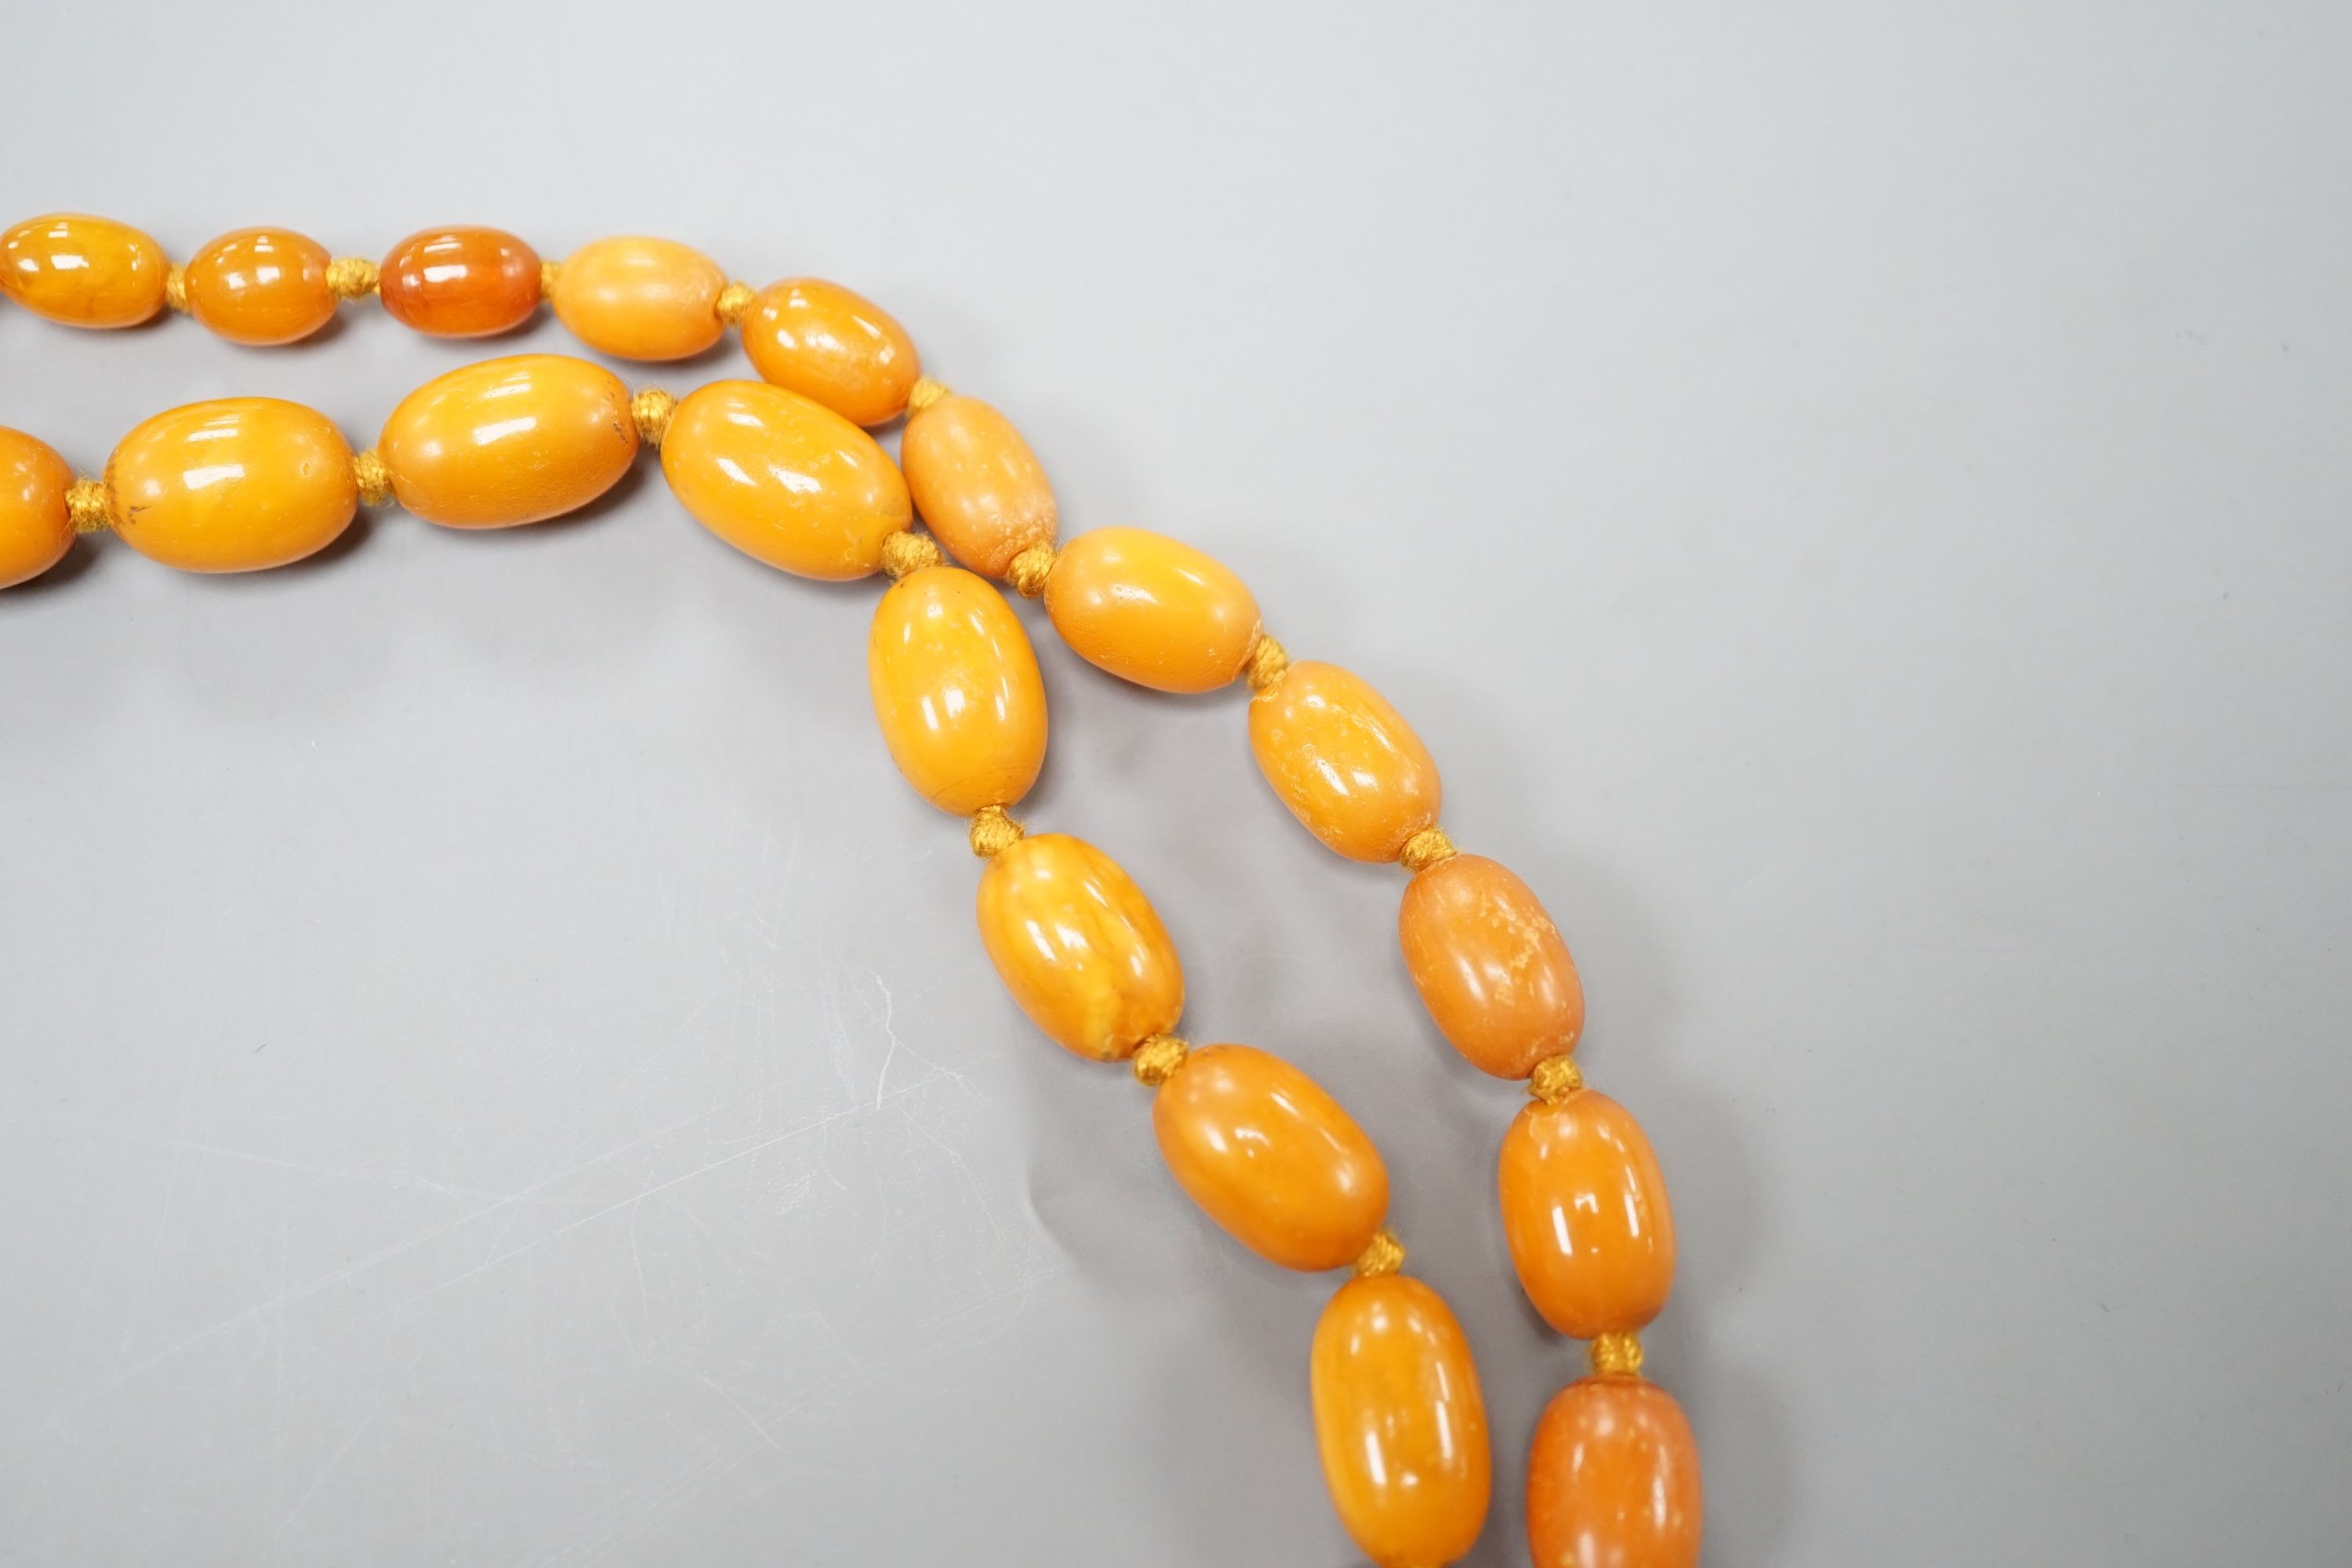 A single strand graduated oval amber bead necklace, 88cm, gross weight 50 grams.